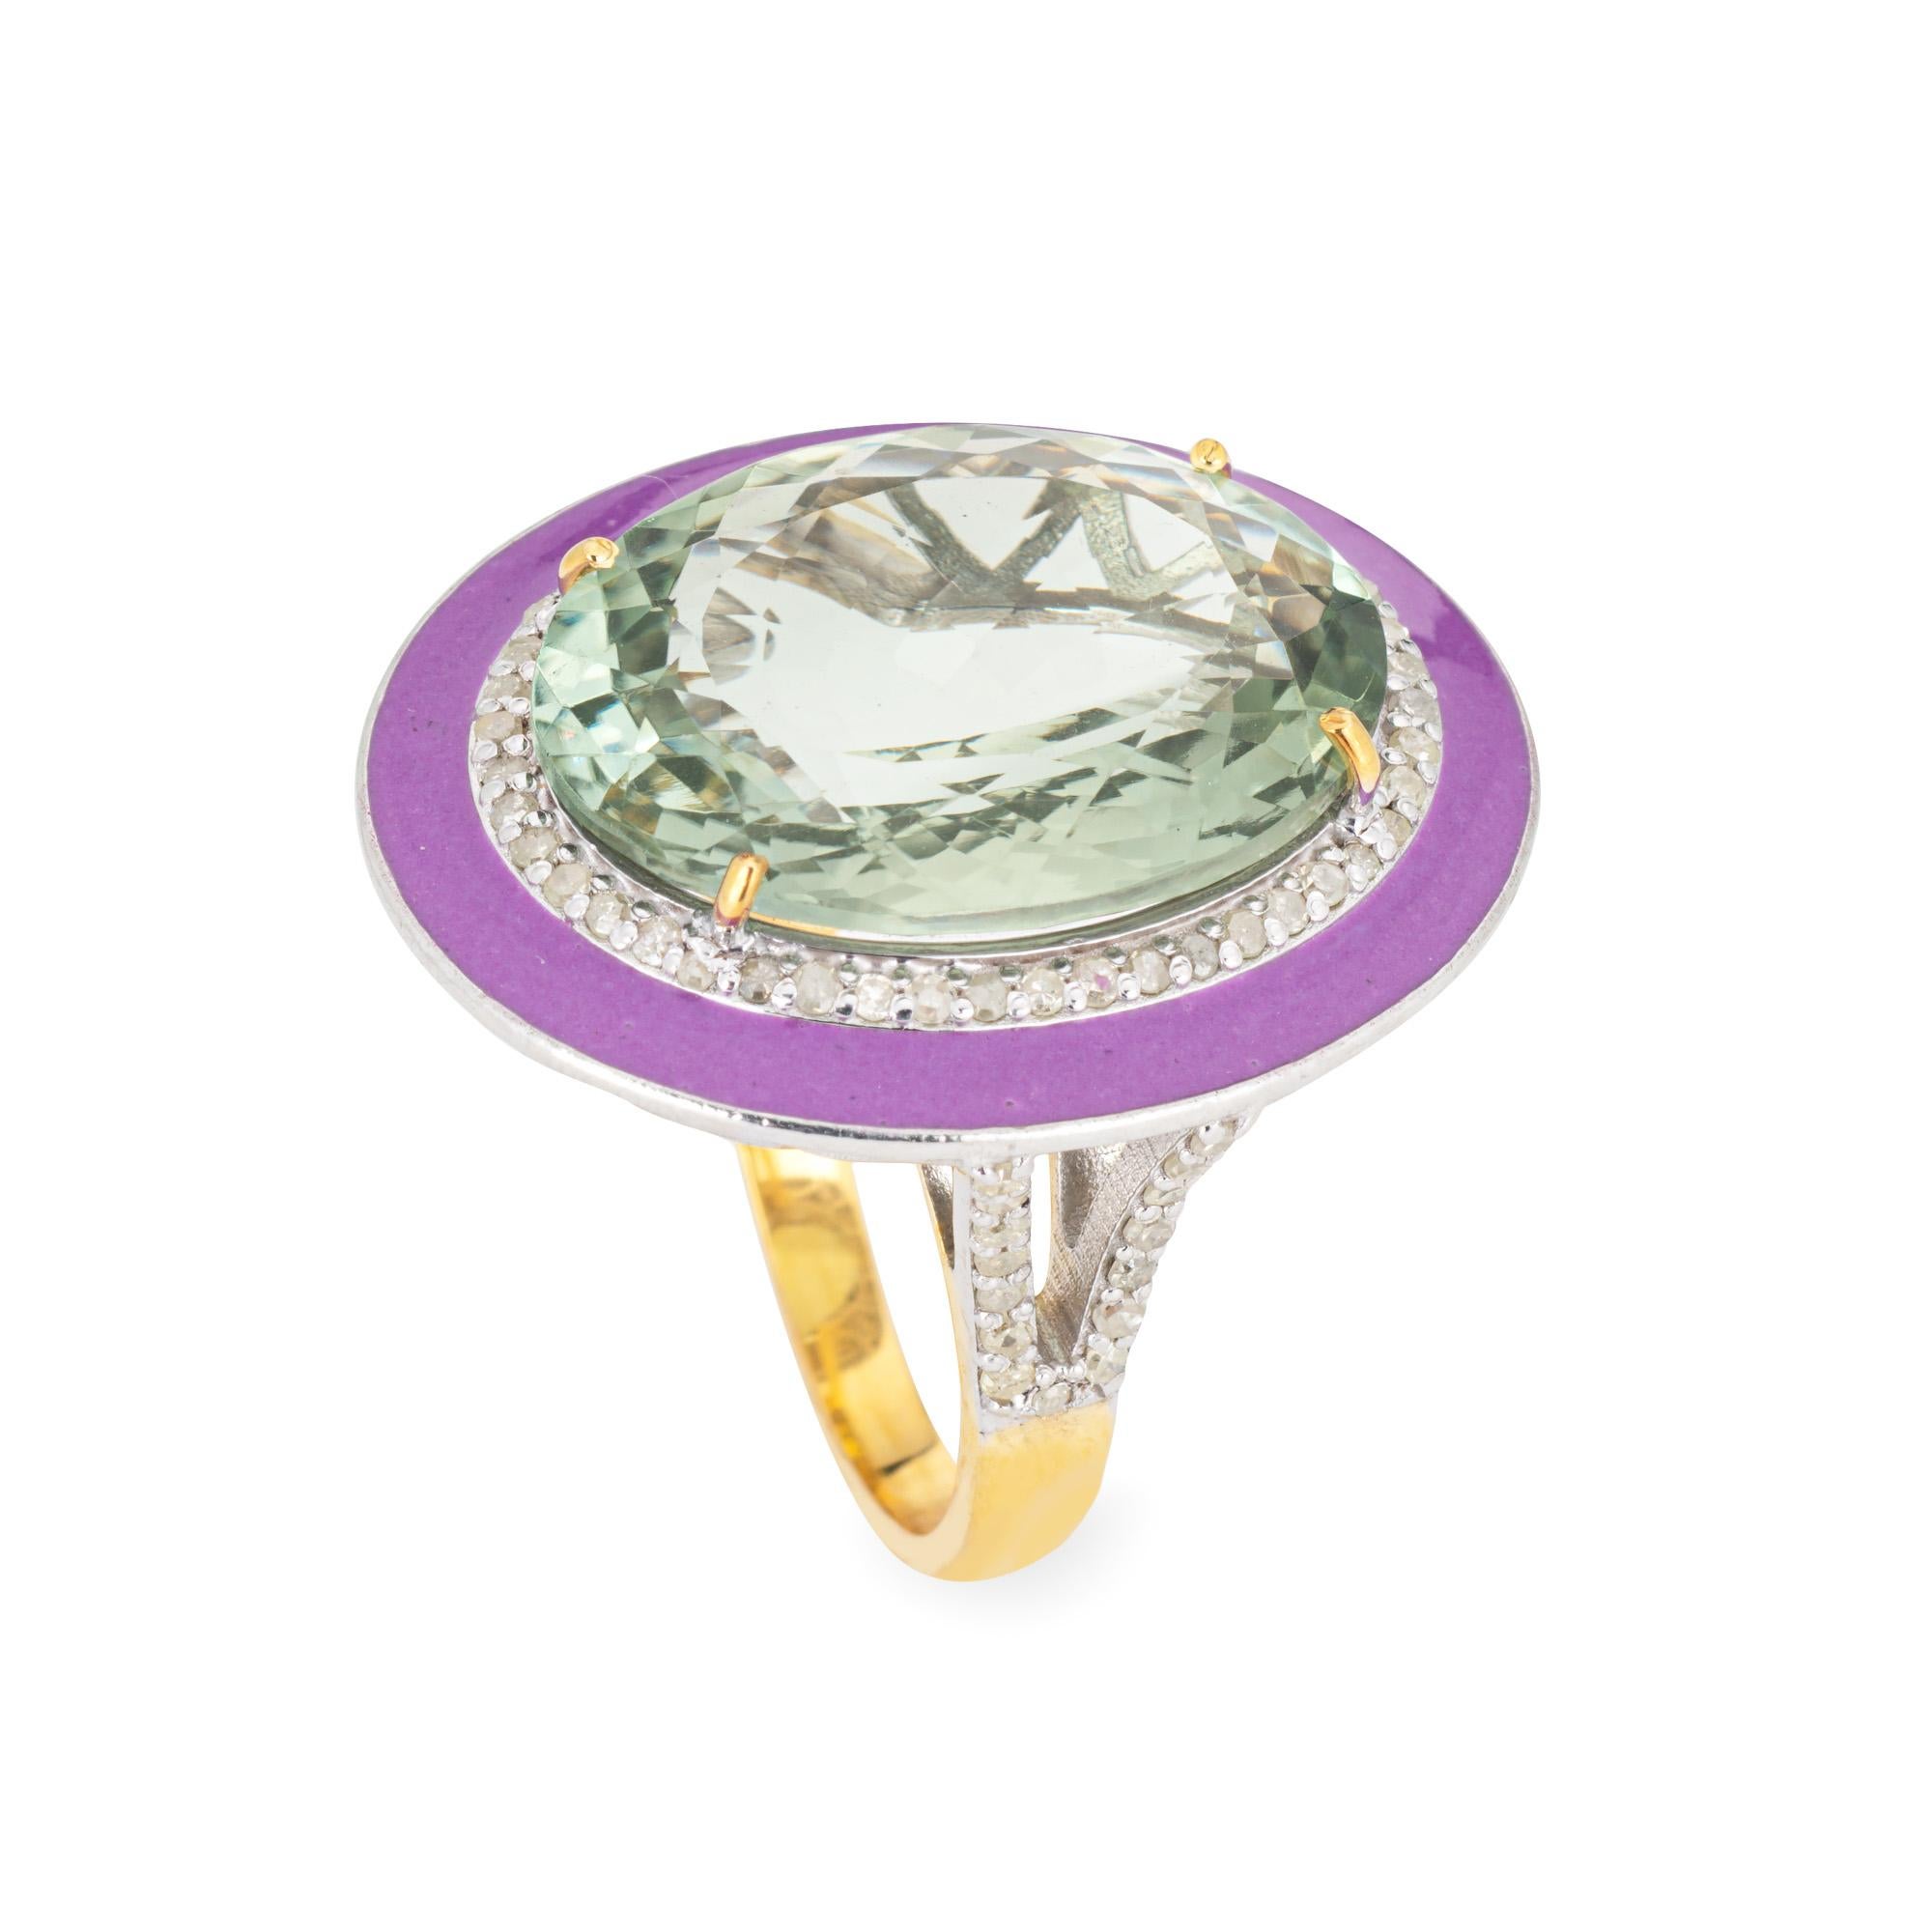 Stylish prasiolite (green amethyst) & diamond cocktail ring crafted in 14 karat yellow gold & silver. 

Faceted oval cut prasiolite measures 20mm x 15mm (estimated at 14 carats). Single cut diamonds total an estimated 0.38 carats (estimated at L-M